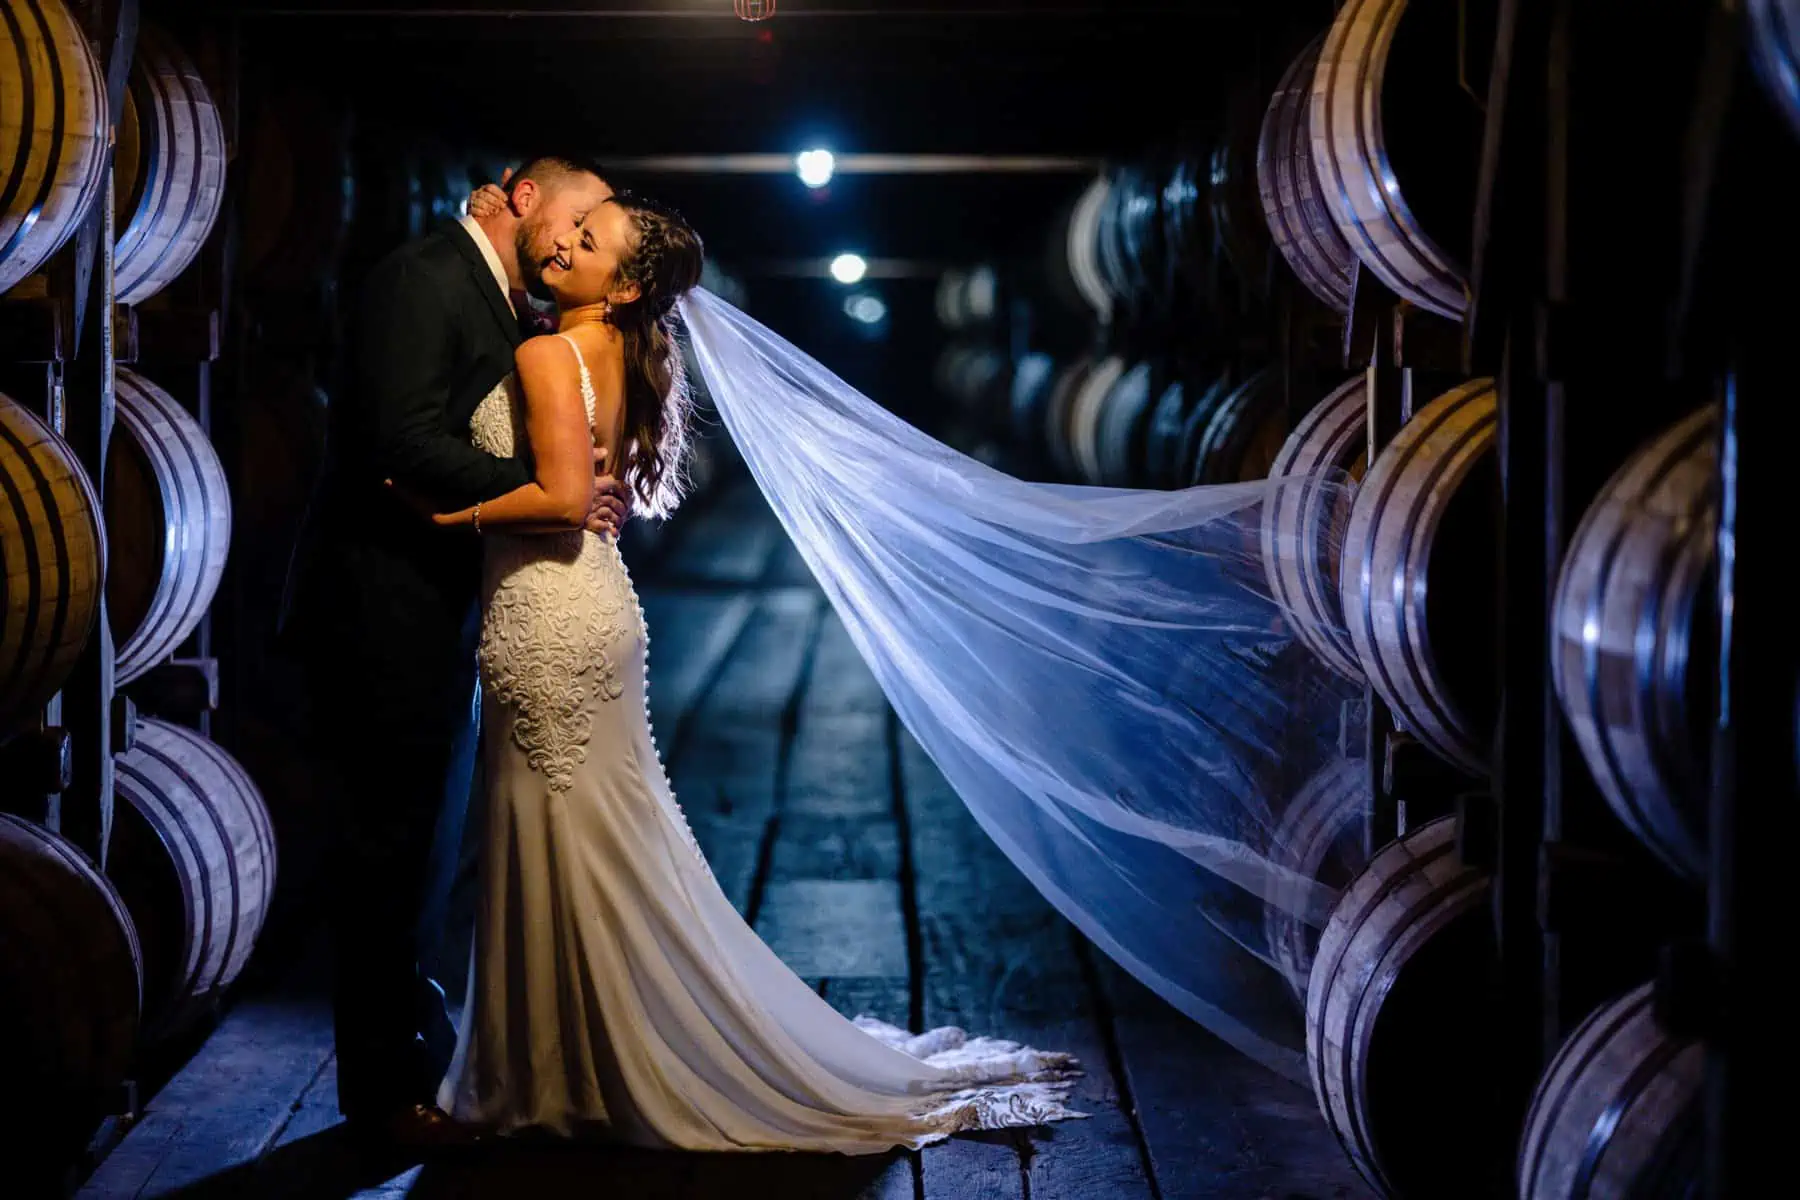 A bride and groom kiss in front of barrels of wine.